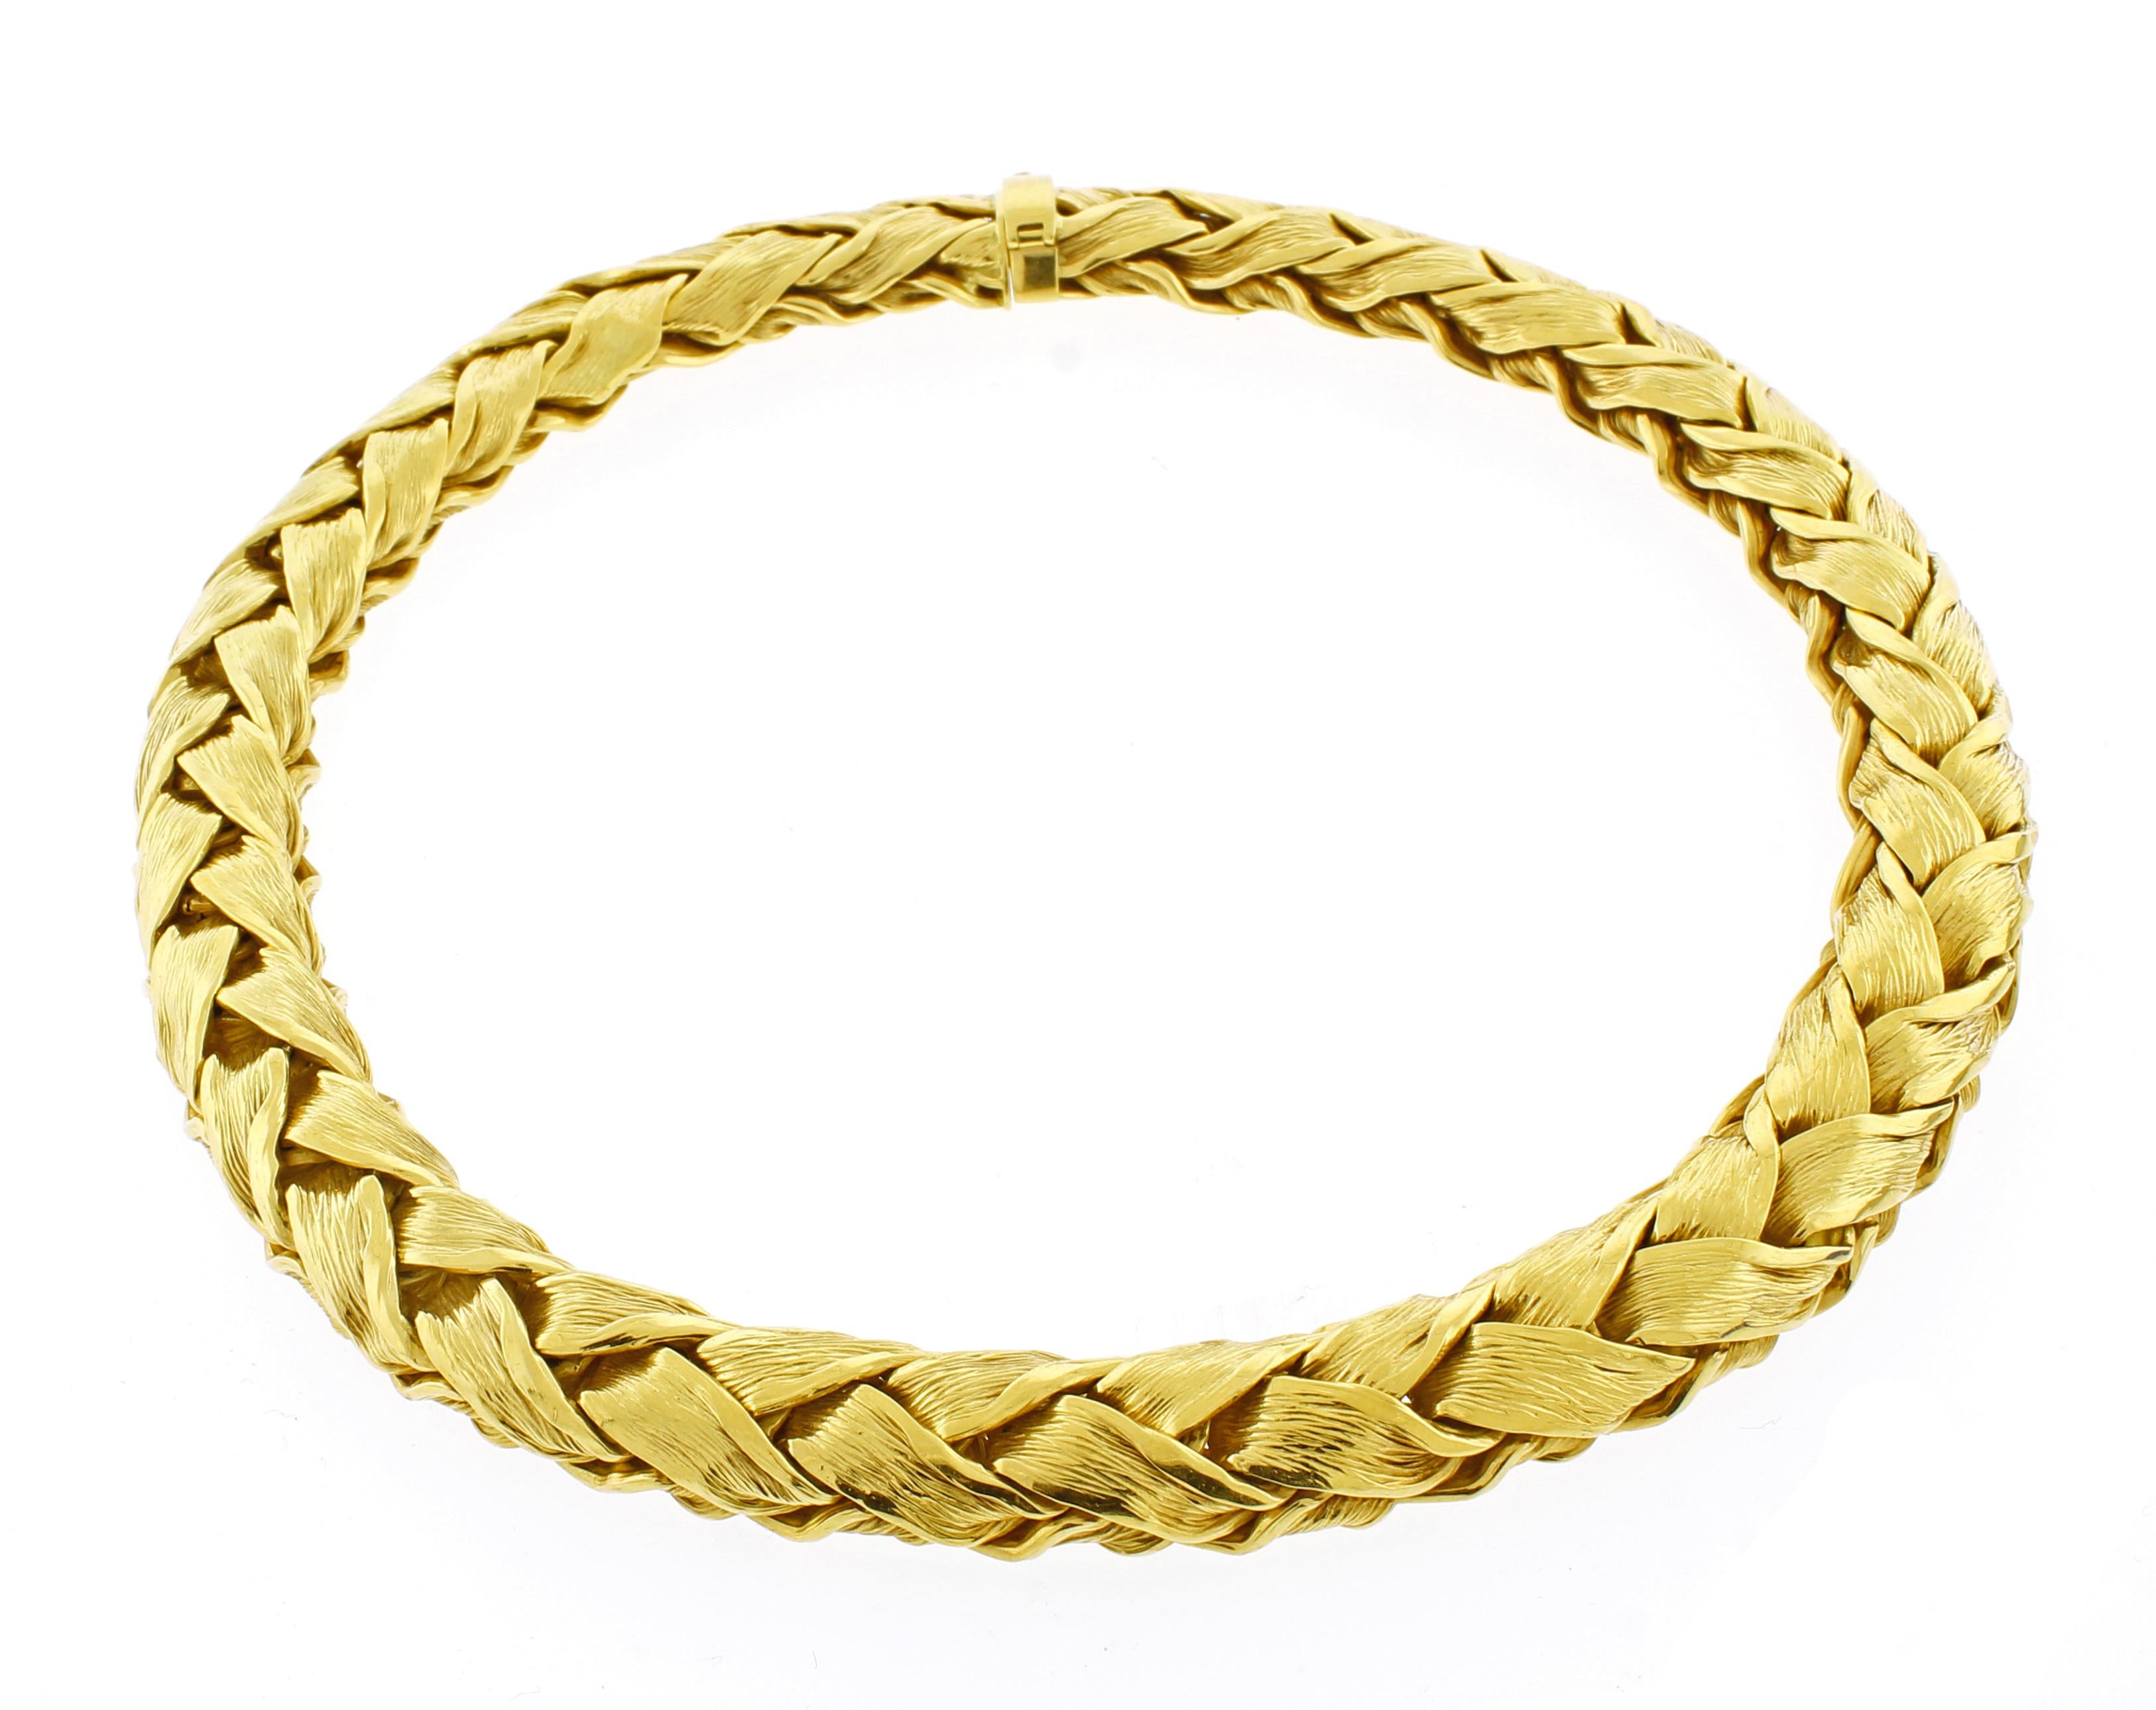 From Tiffany & Co. this wide  woven  choker necklace. This bold necklace boasts over five ounces of shimmering 18 karat gold
♦ Designer: Tiffany & Co.
♦ Metal: 18 karat
♦ 9/16 of an inch wide 
♦ 16 inch
♦ Circa 1985
♦ 167 grams
♦ Packaging: